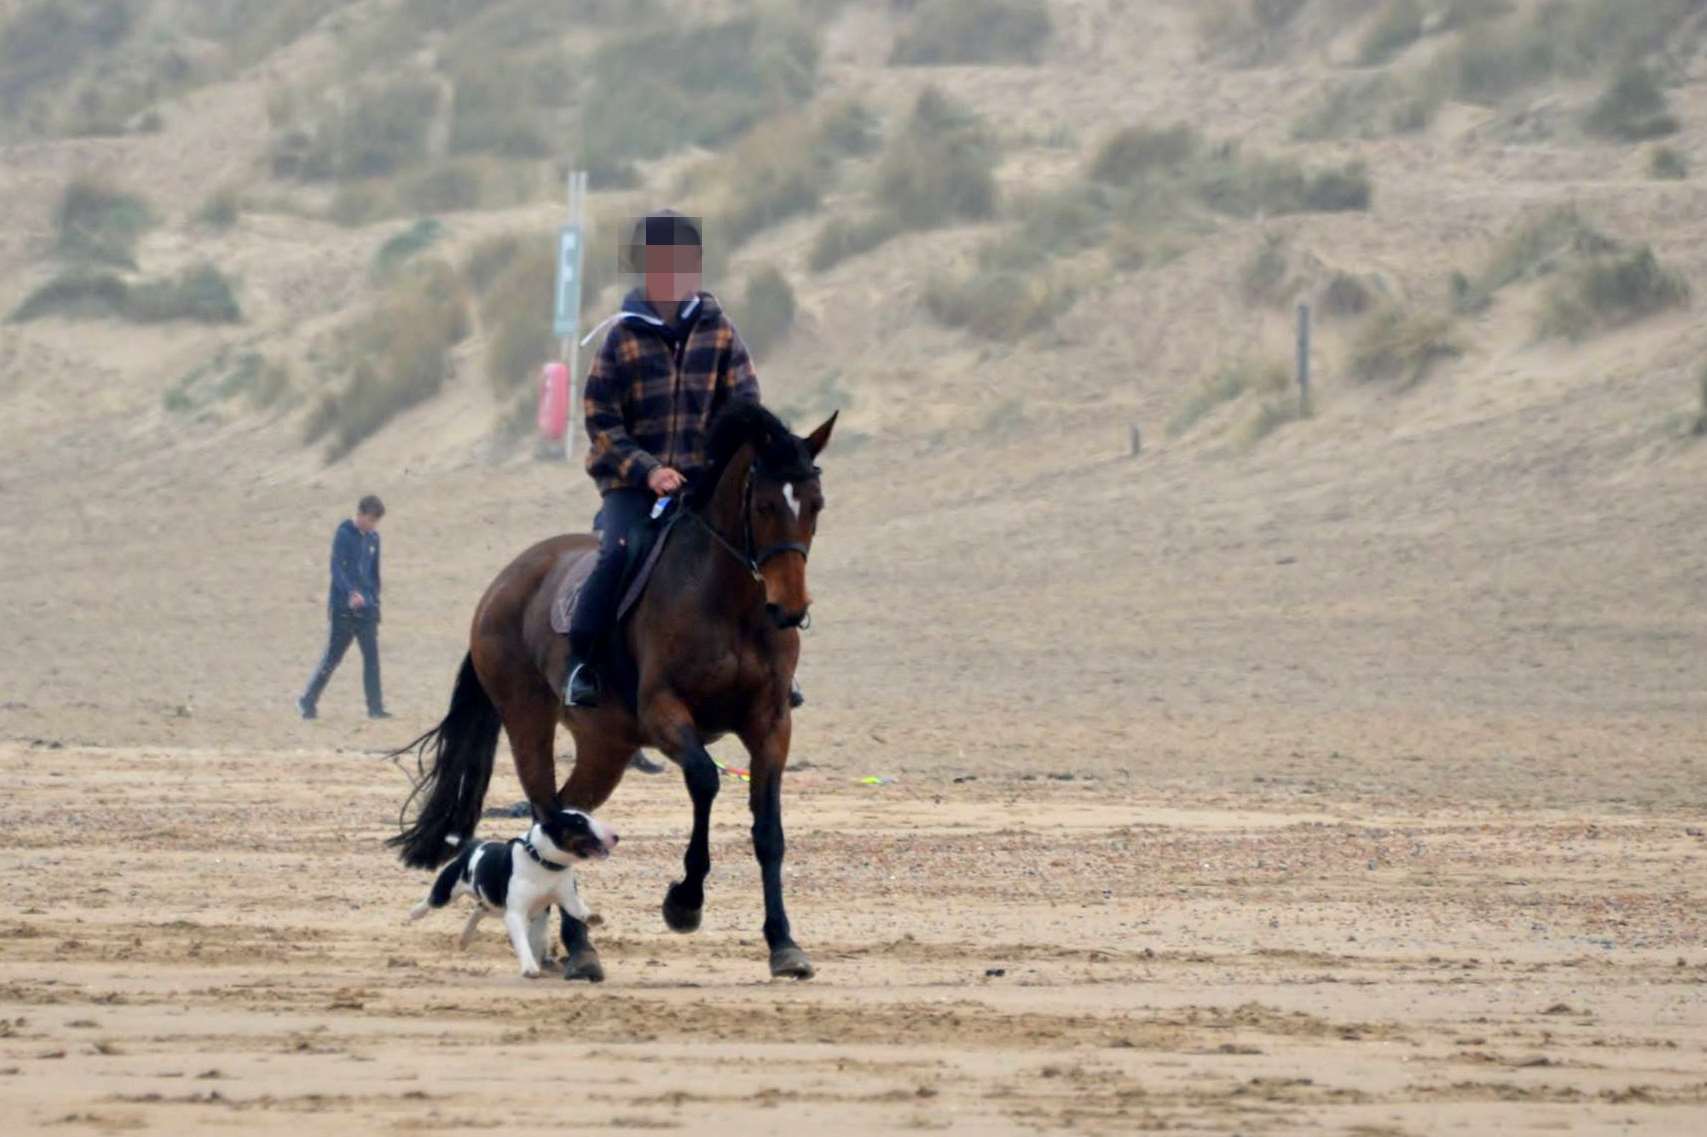 Photos posted on social media of the dog chasing after a horse shortly before attacking it on Camber Sands beach